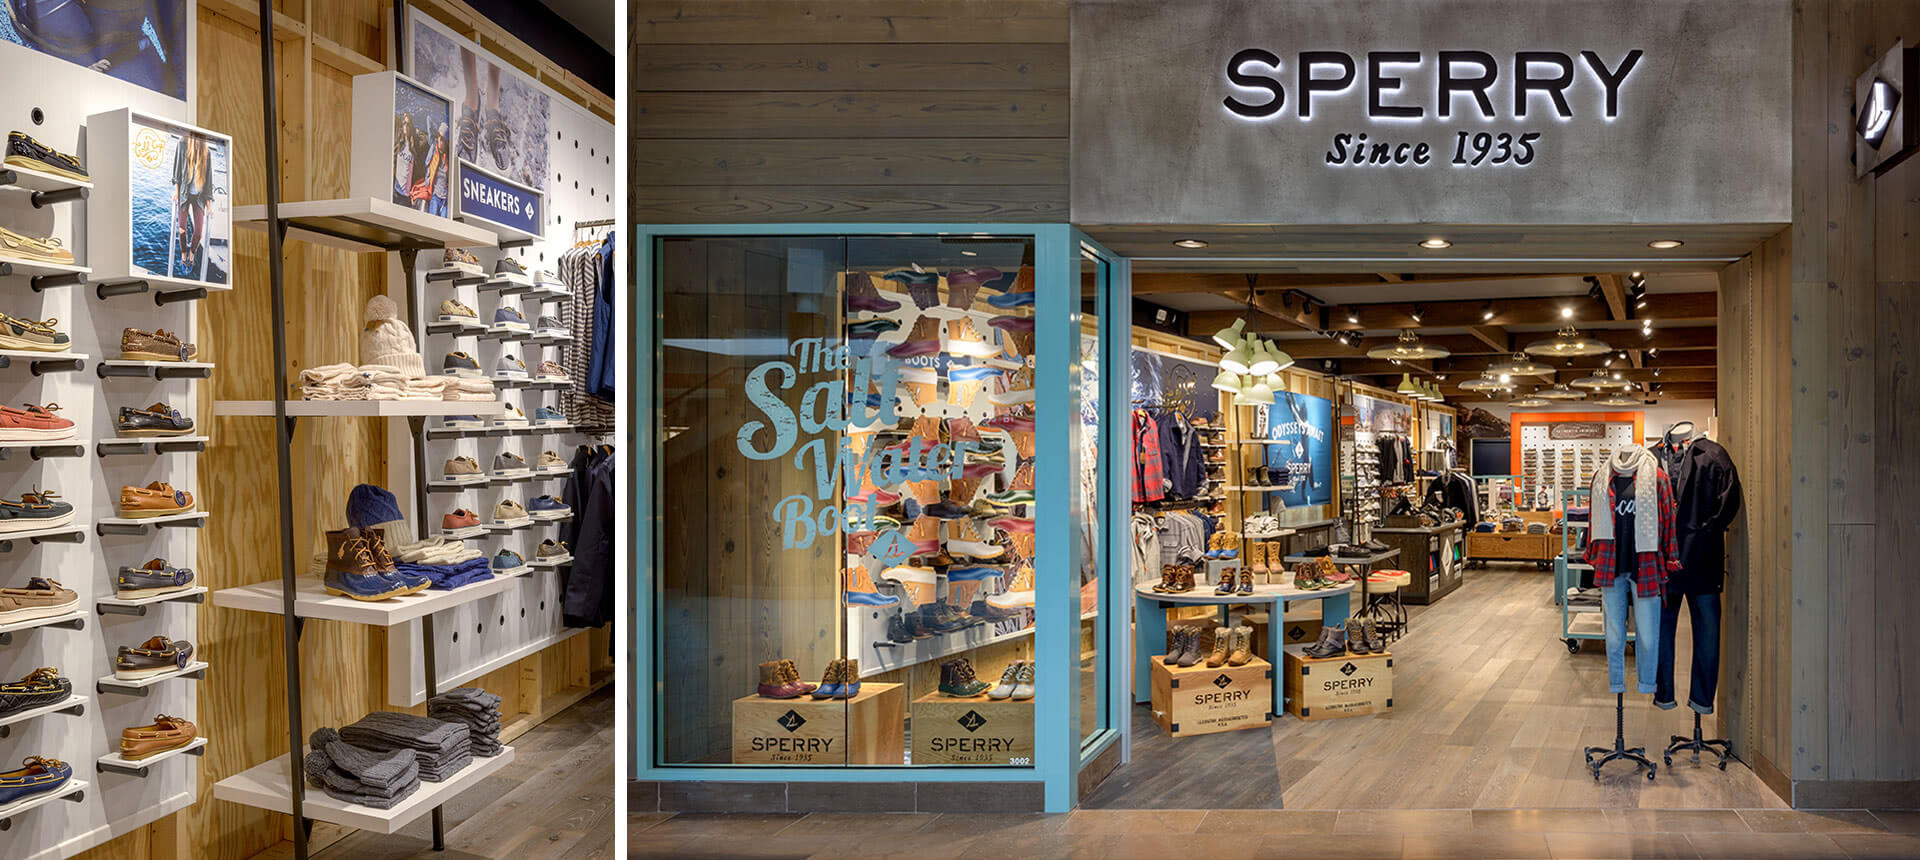 sperry retail store near me